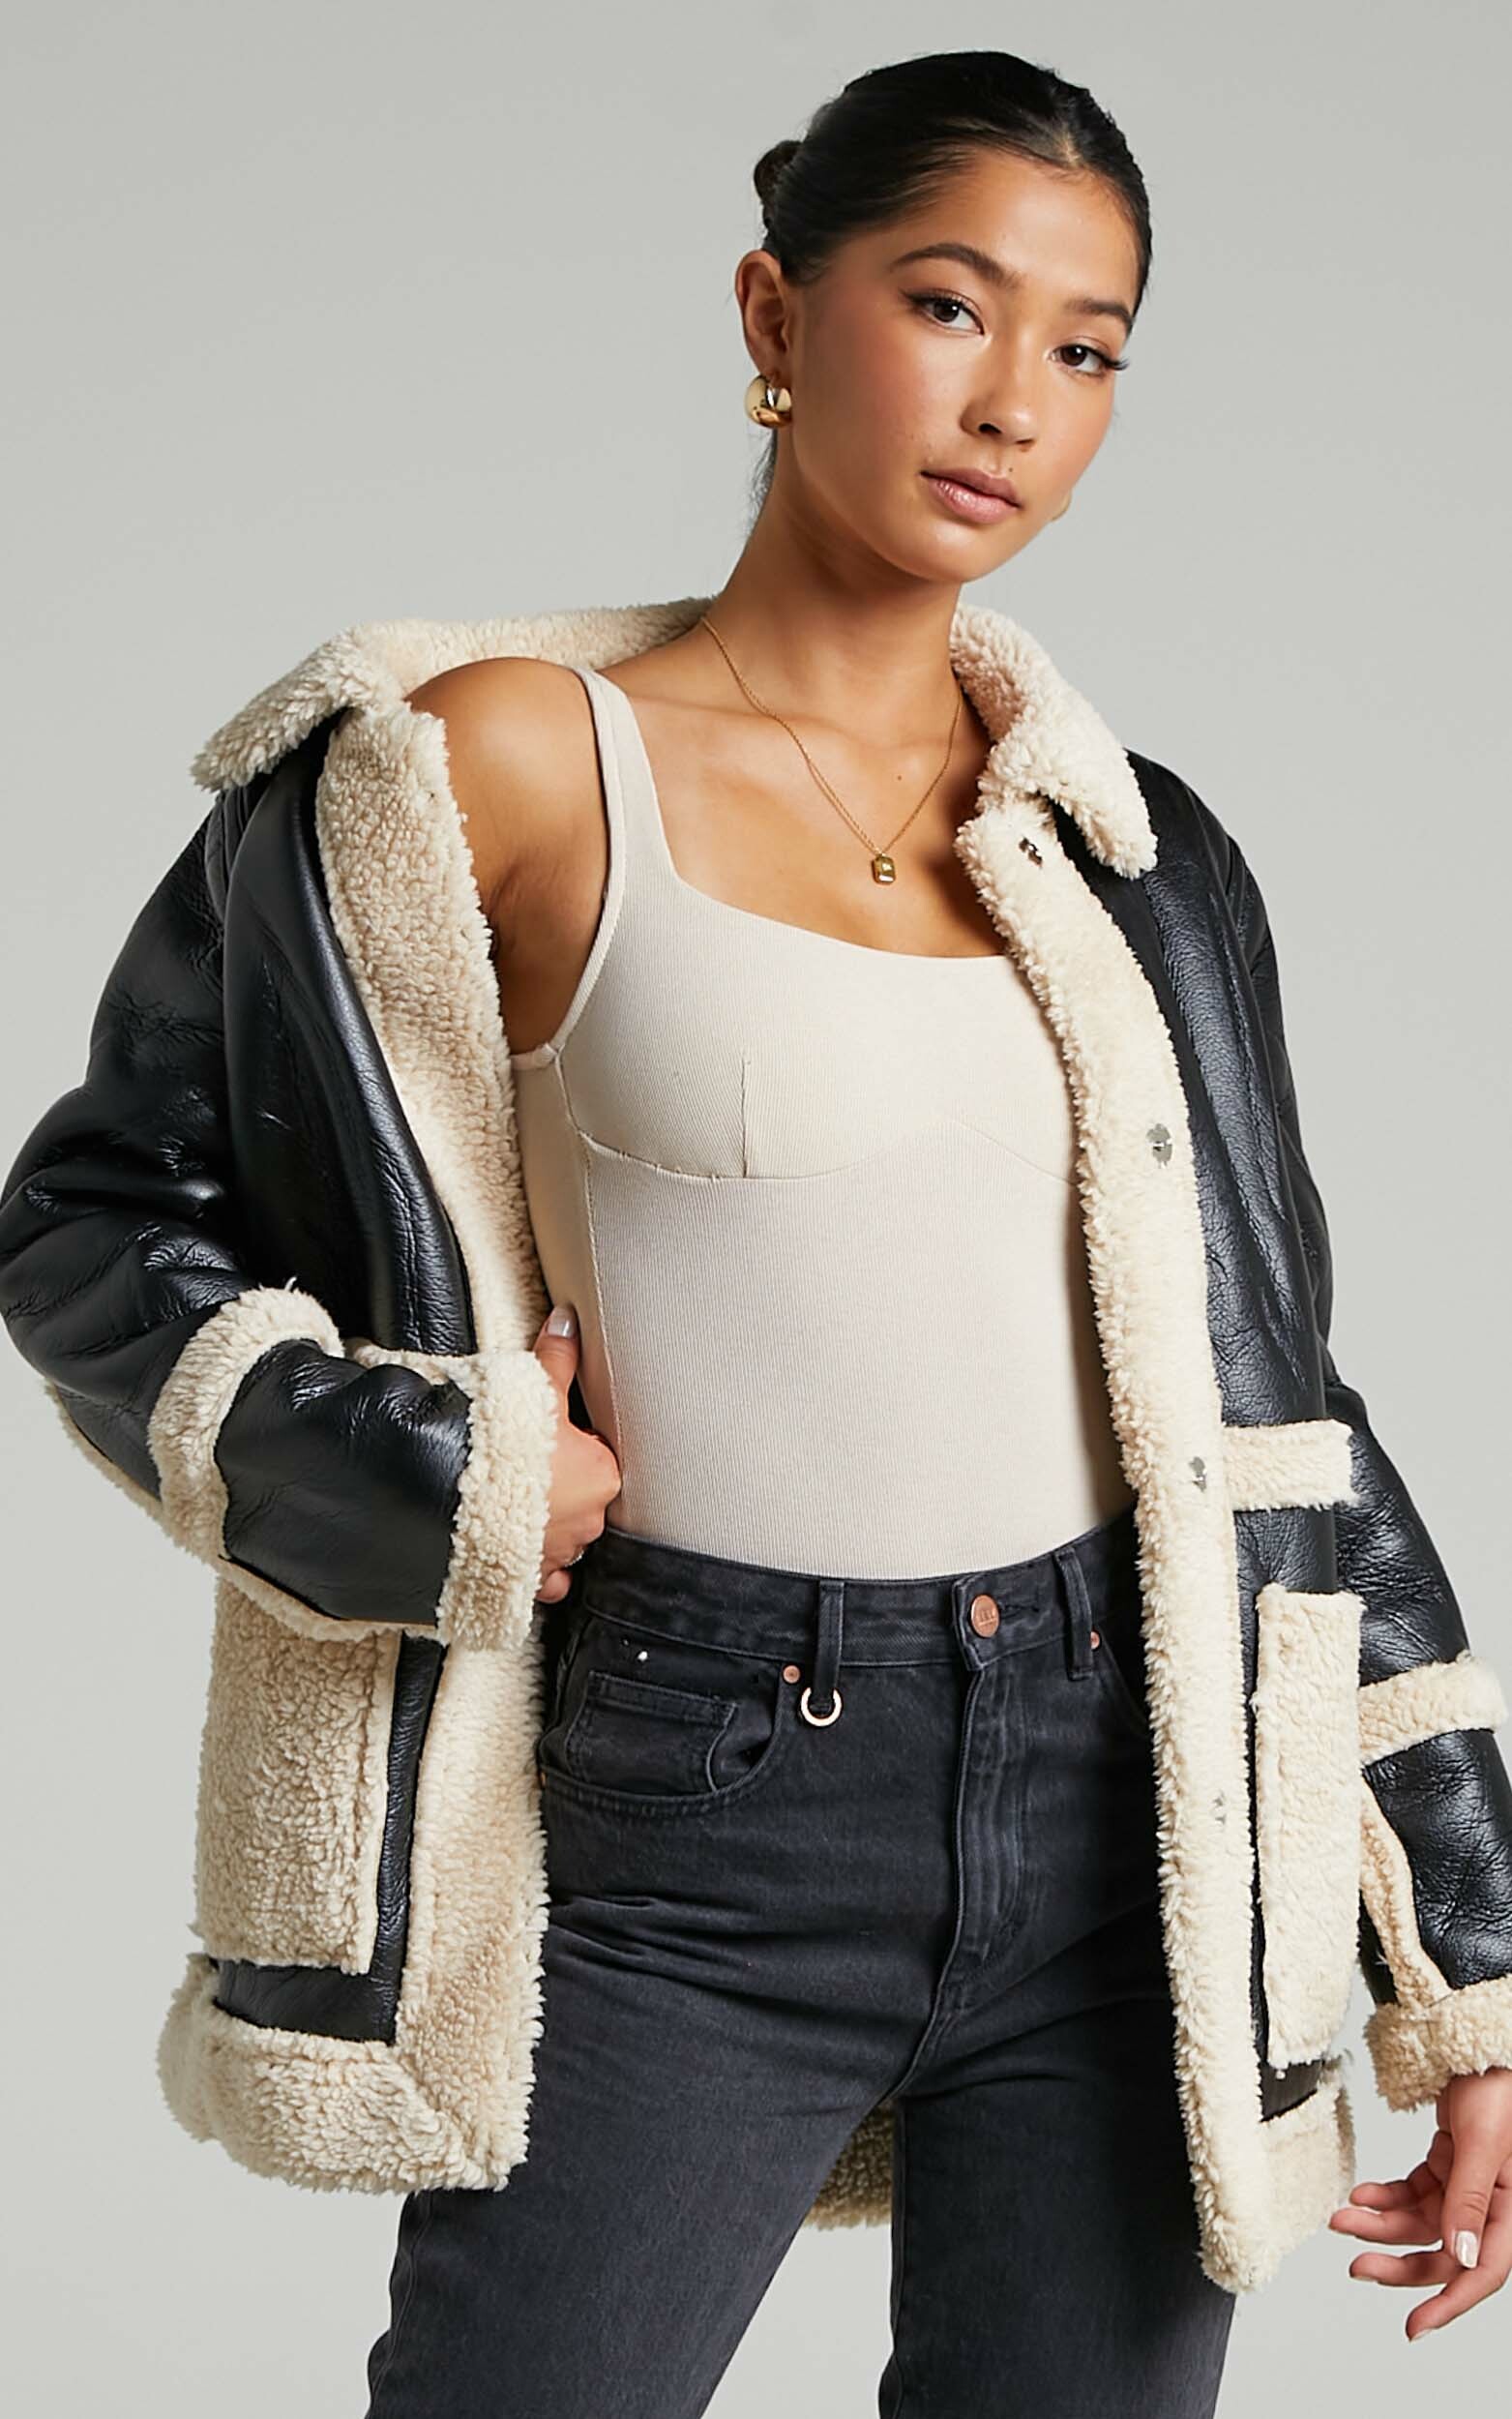 Ruth Faux Shearling Aviator Jacket in Black - 04, BLK1, hi-res image number null